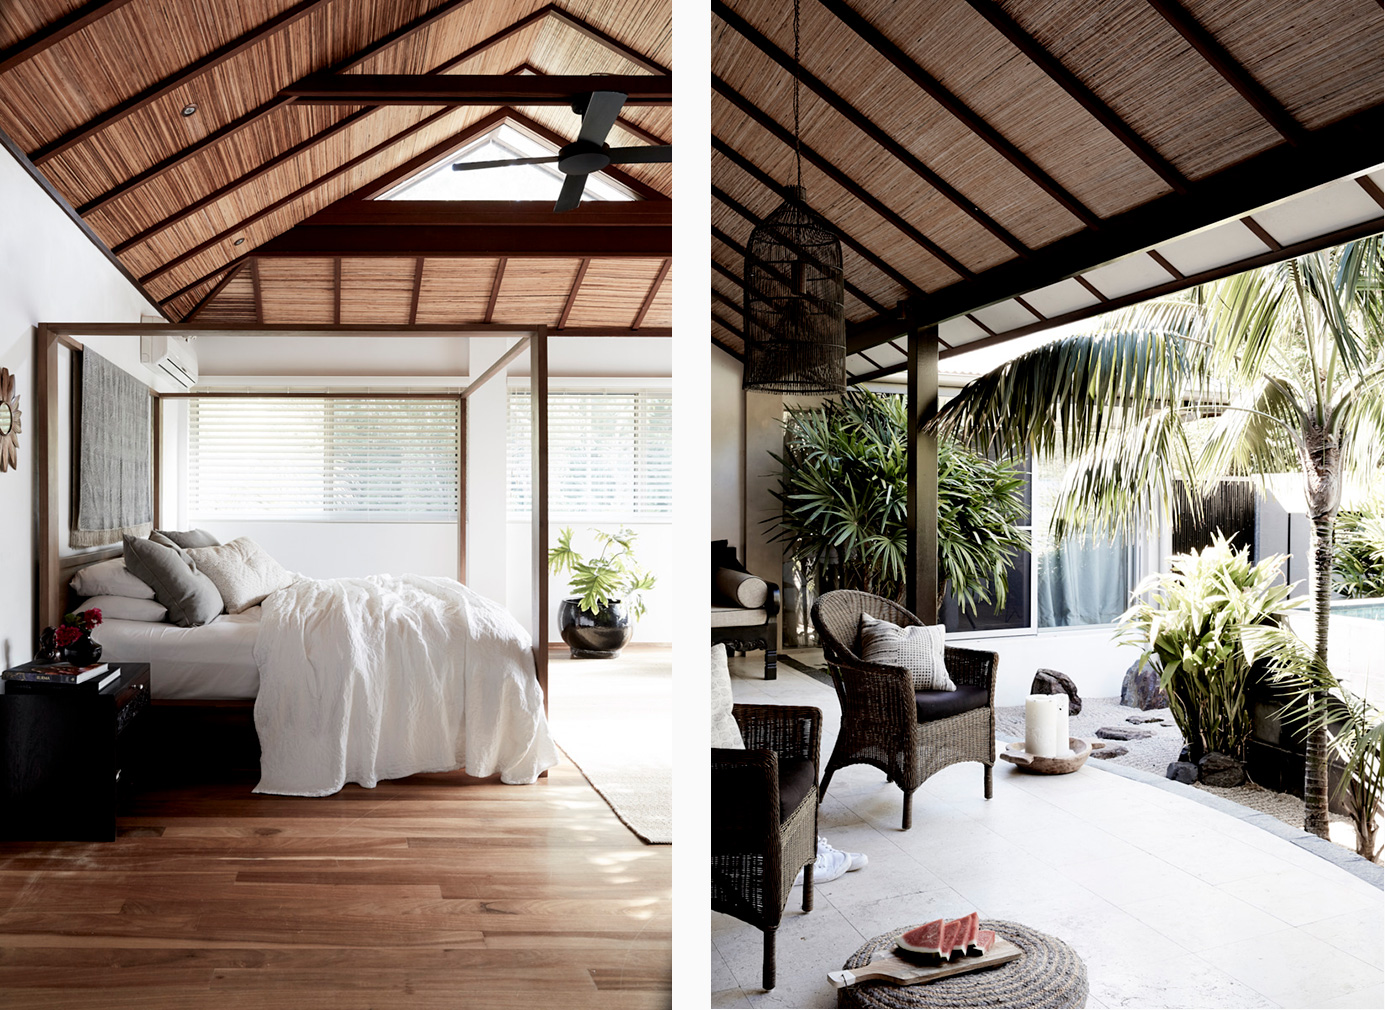 Australian holiday homes designed for slow living this summer: Byron Beach villa